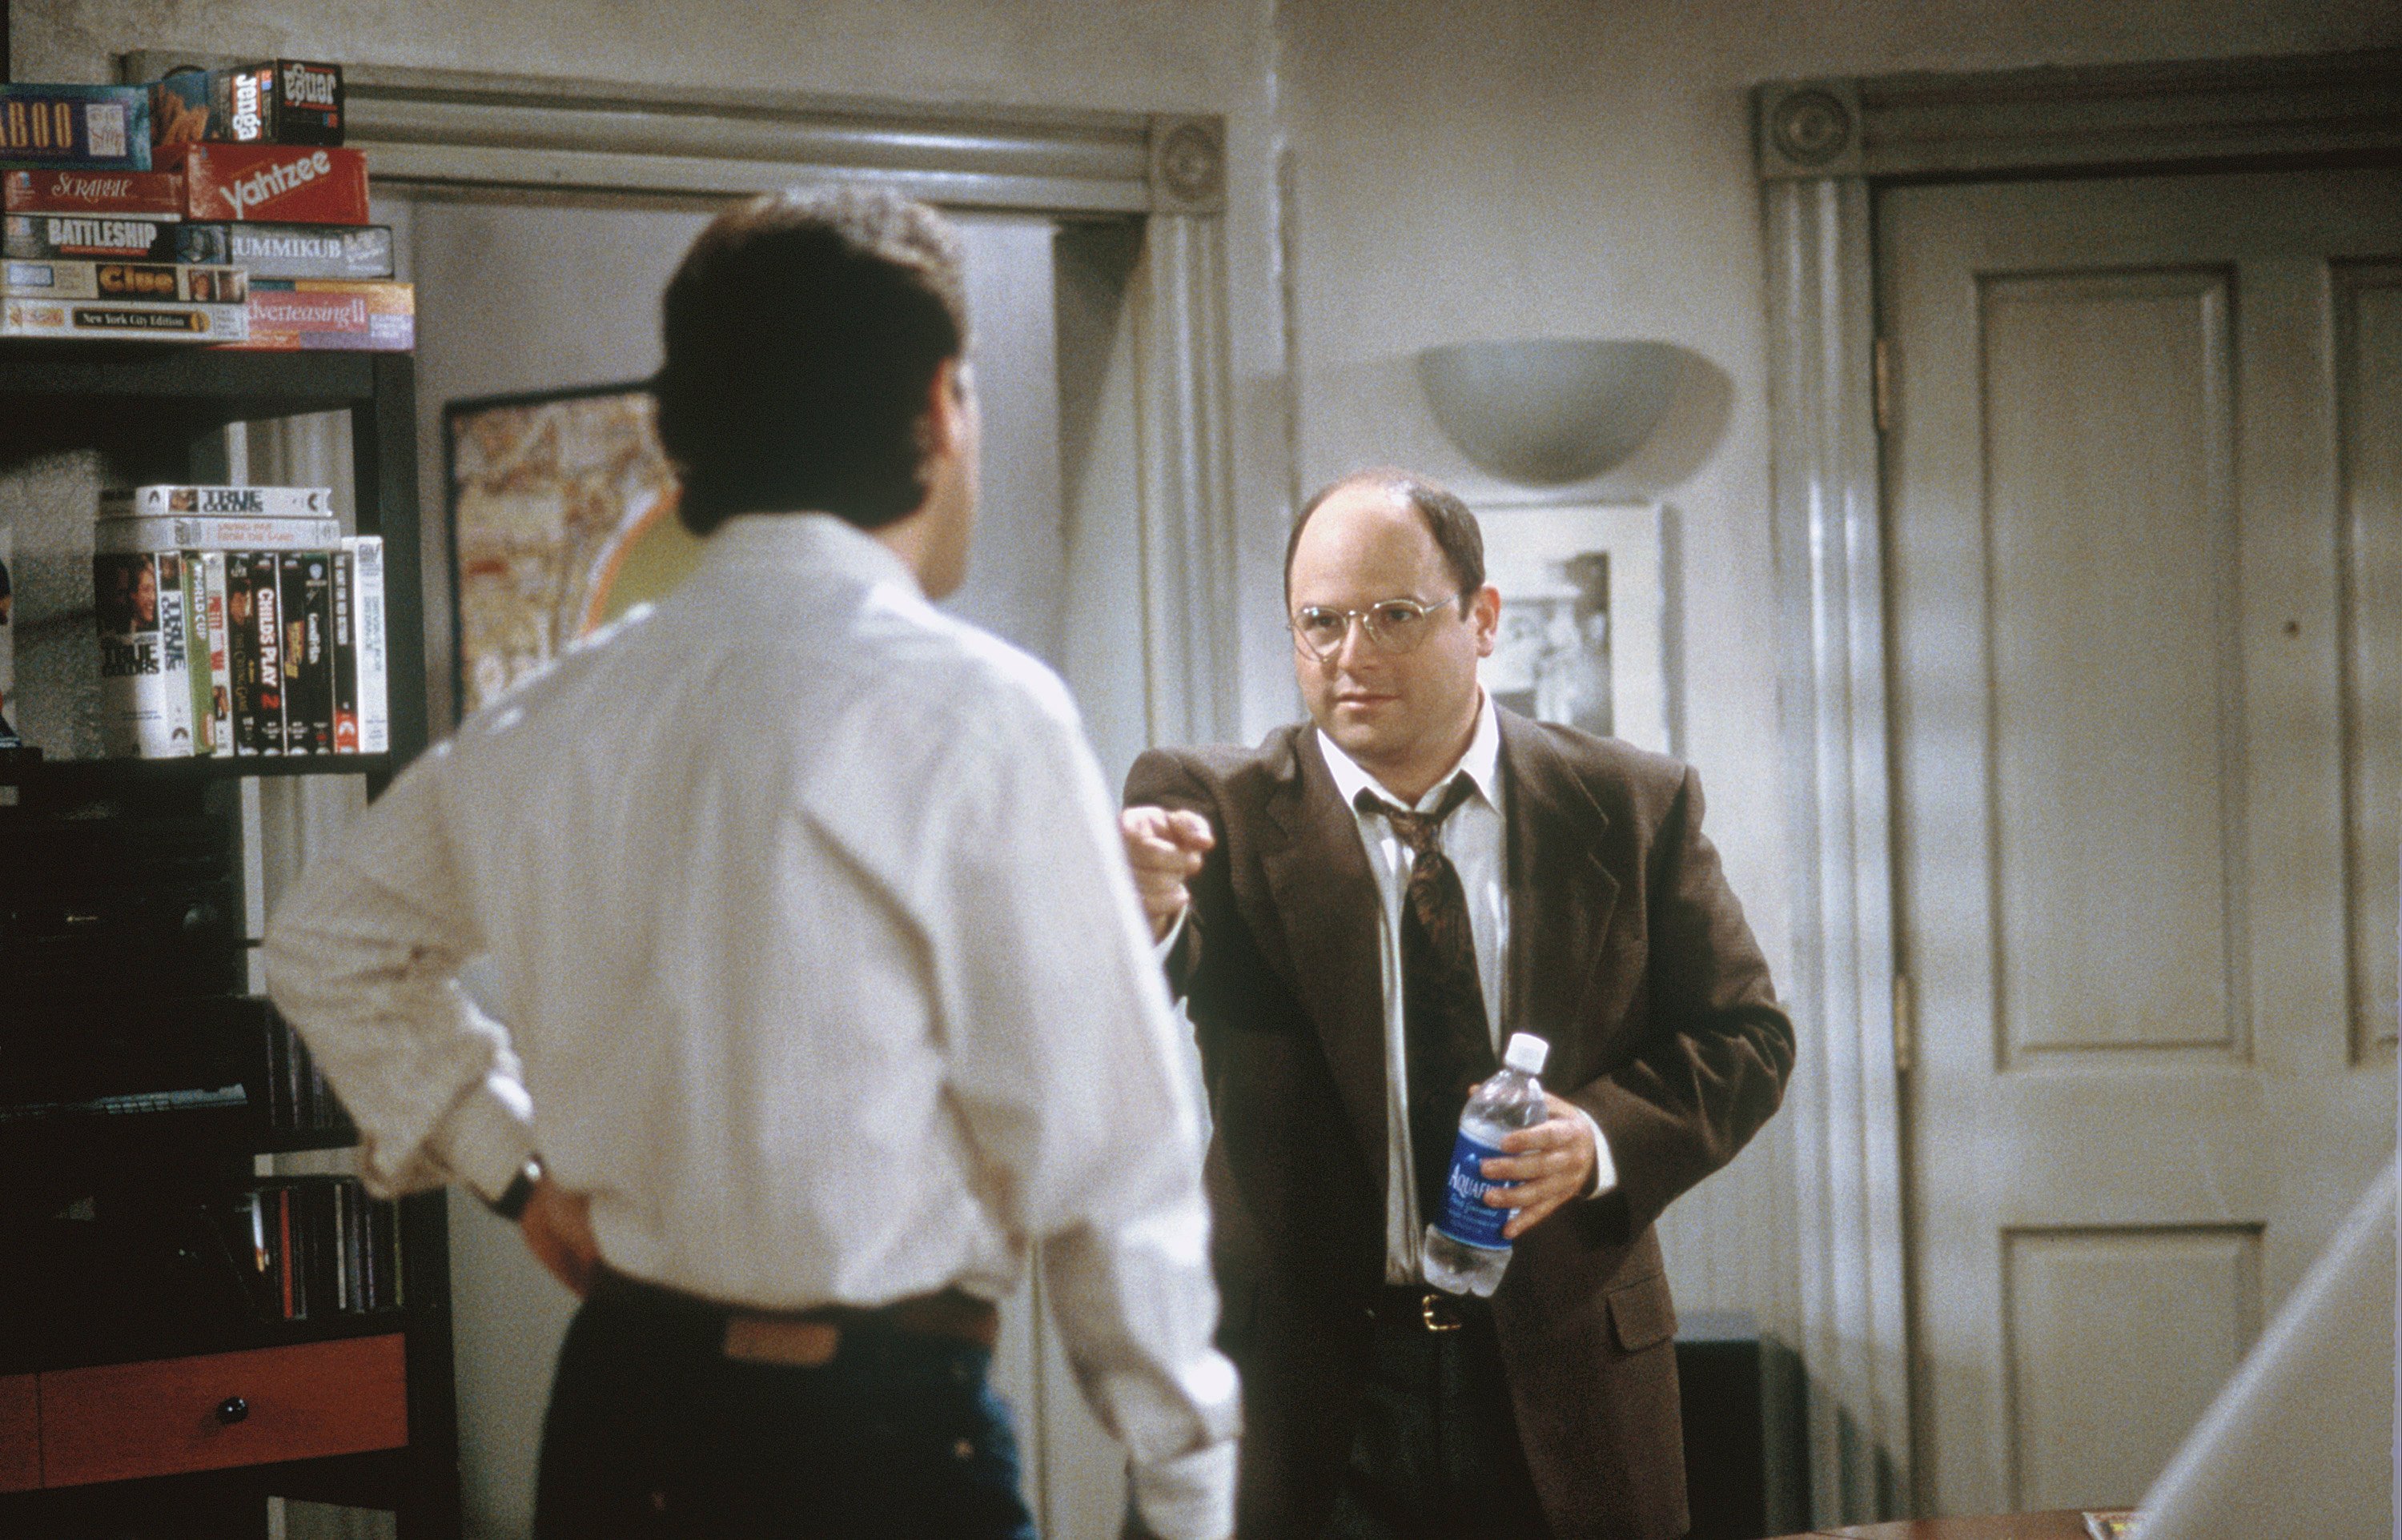 Jerry Seinfeld and Jason Alexander in a scene from 'Seinfeld'